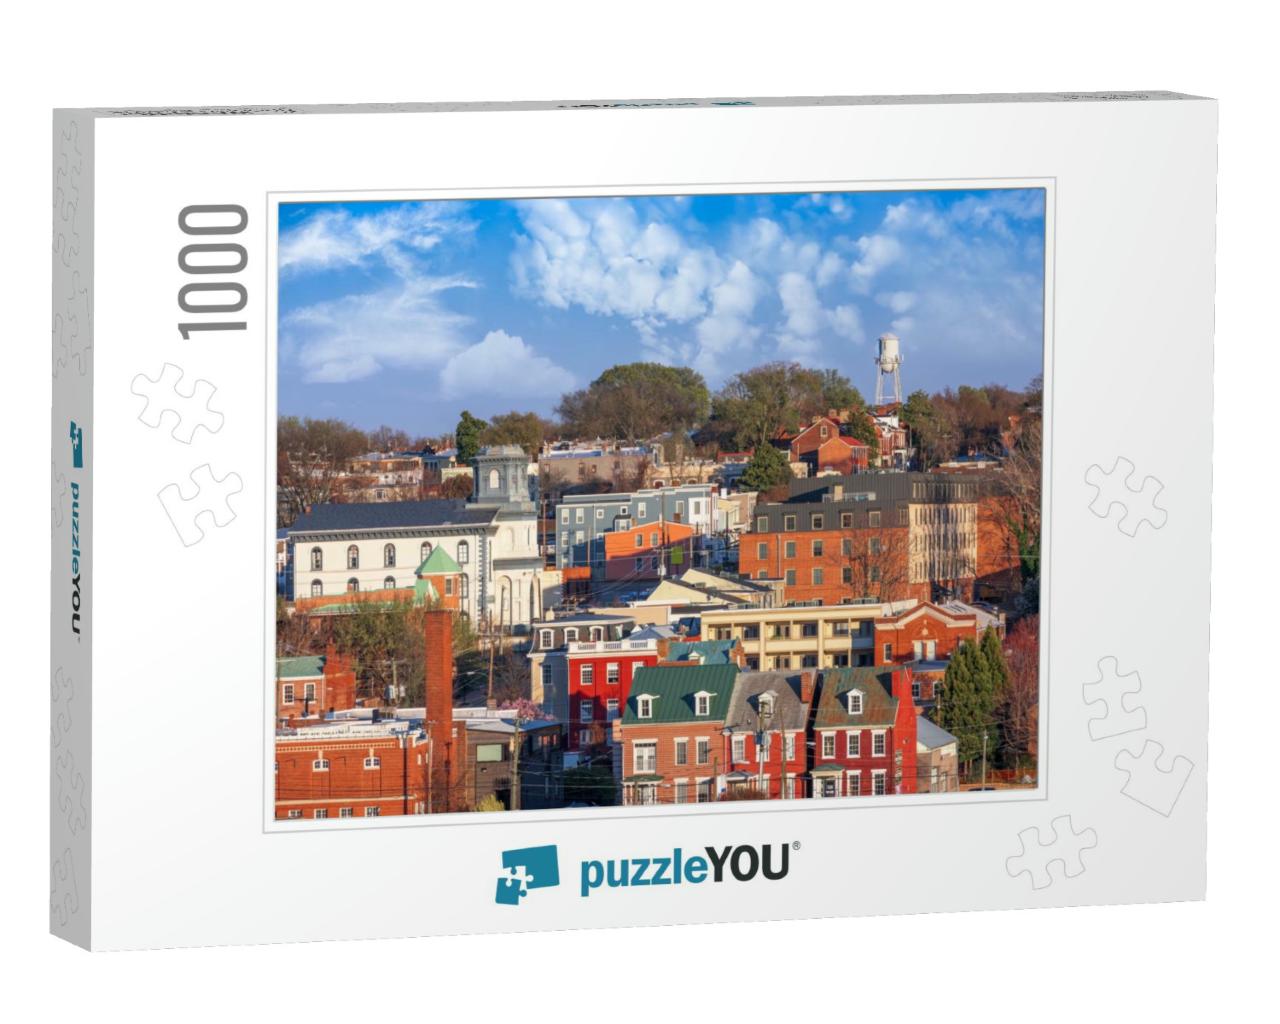 Richmond, Virginia Neighborhoods & Cityscape in the After... Jigsaw Puzzle with 1000 pieces